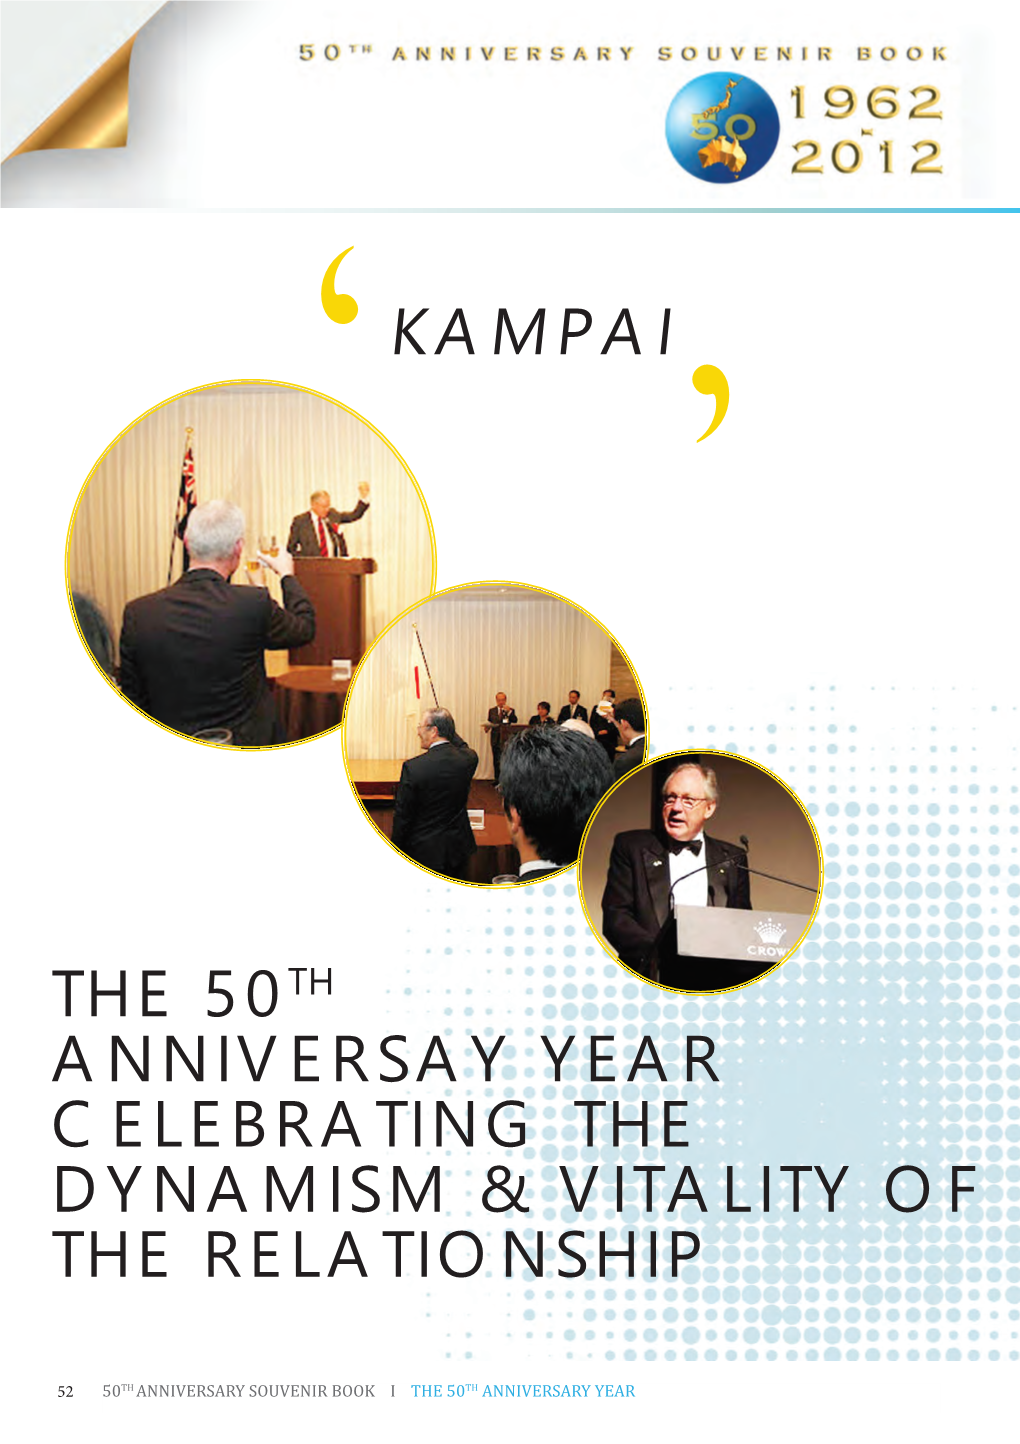 The 50Th Anniversay Year Celebrating the Dynamism & Vitality of The